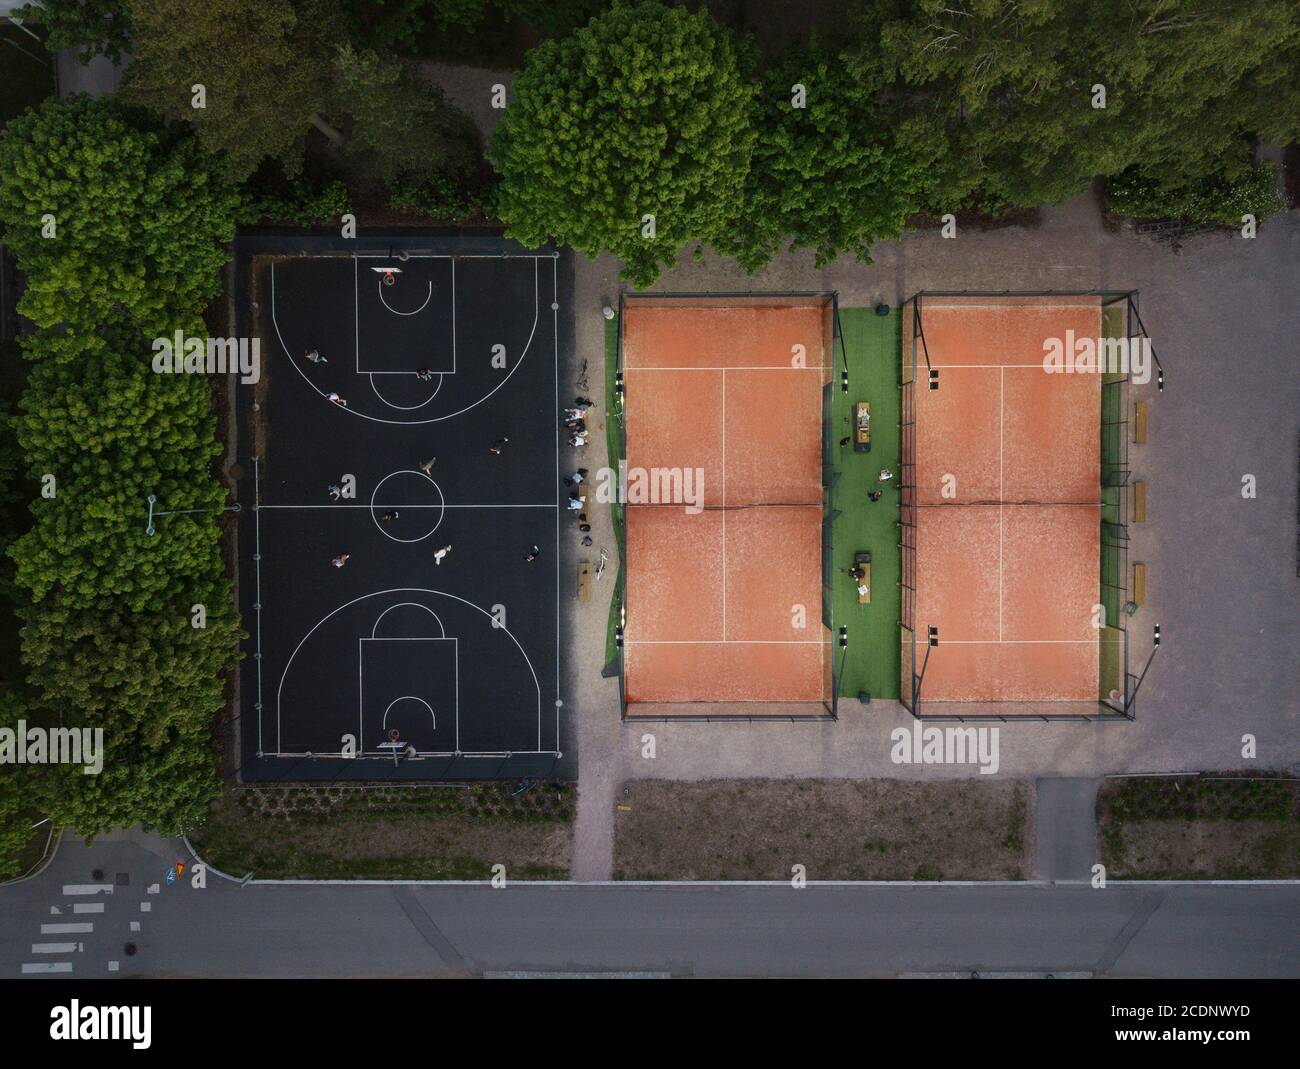 Basketball court and 3 tennis courts from above Stock Photo